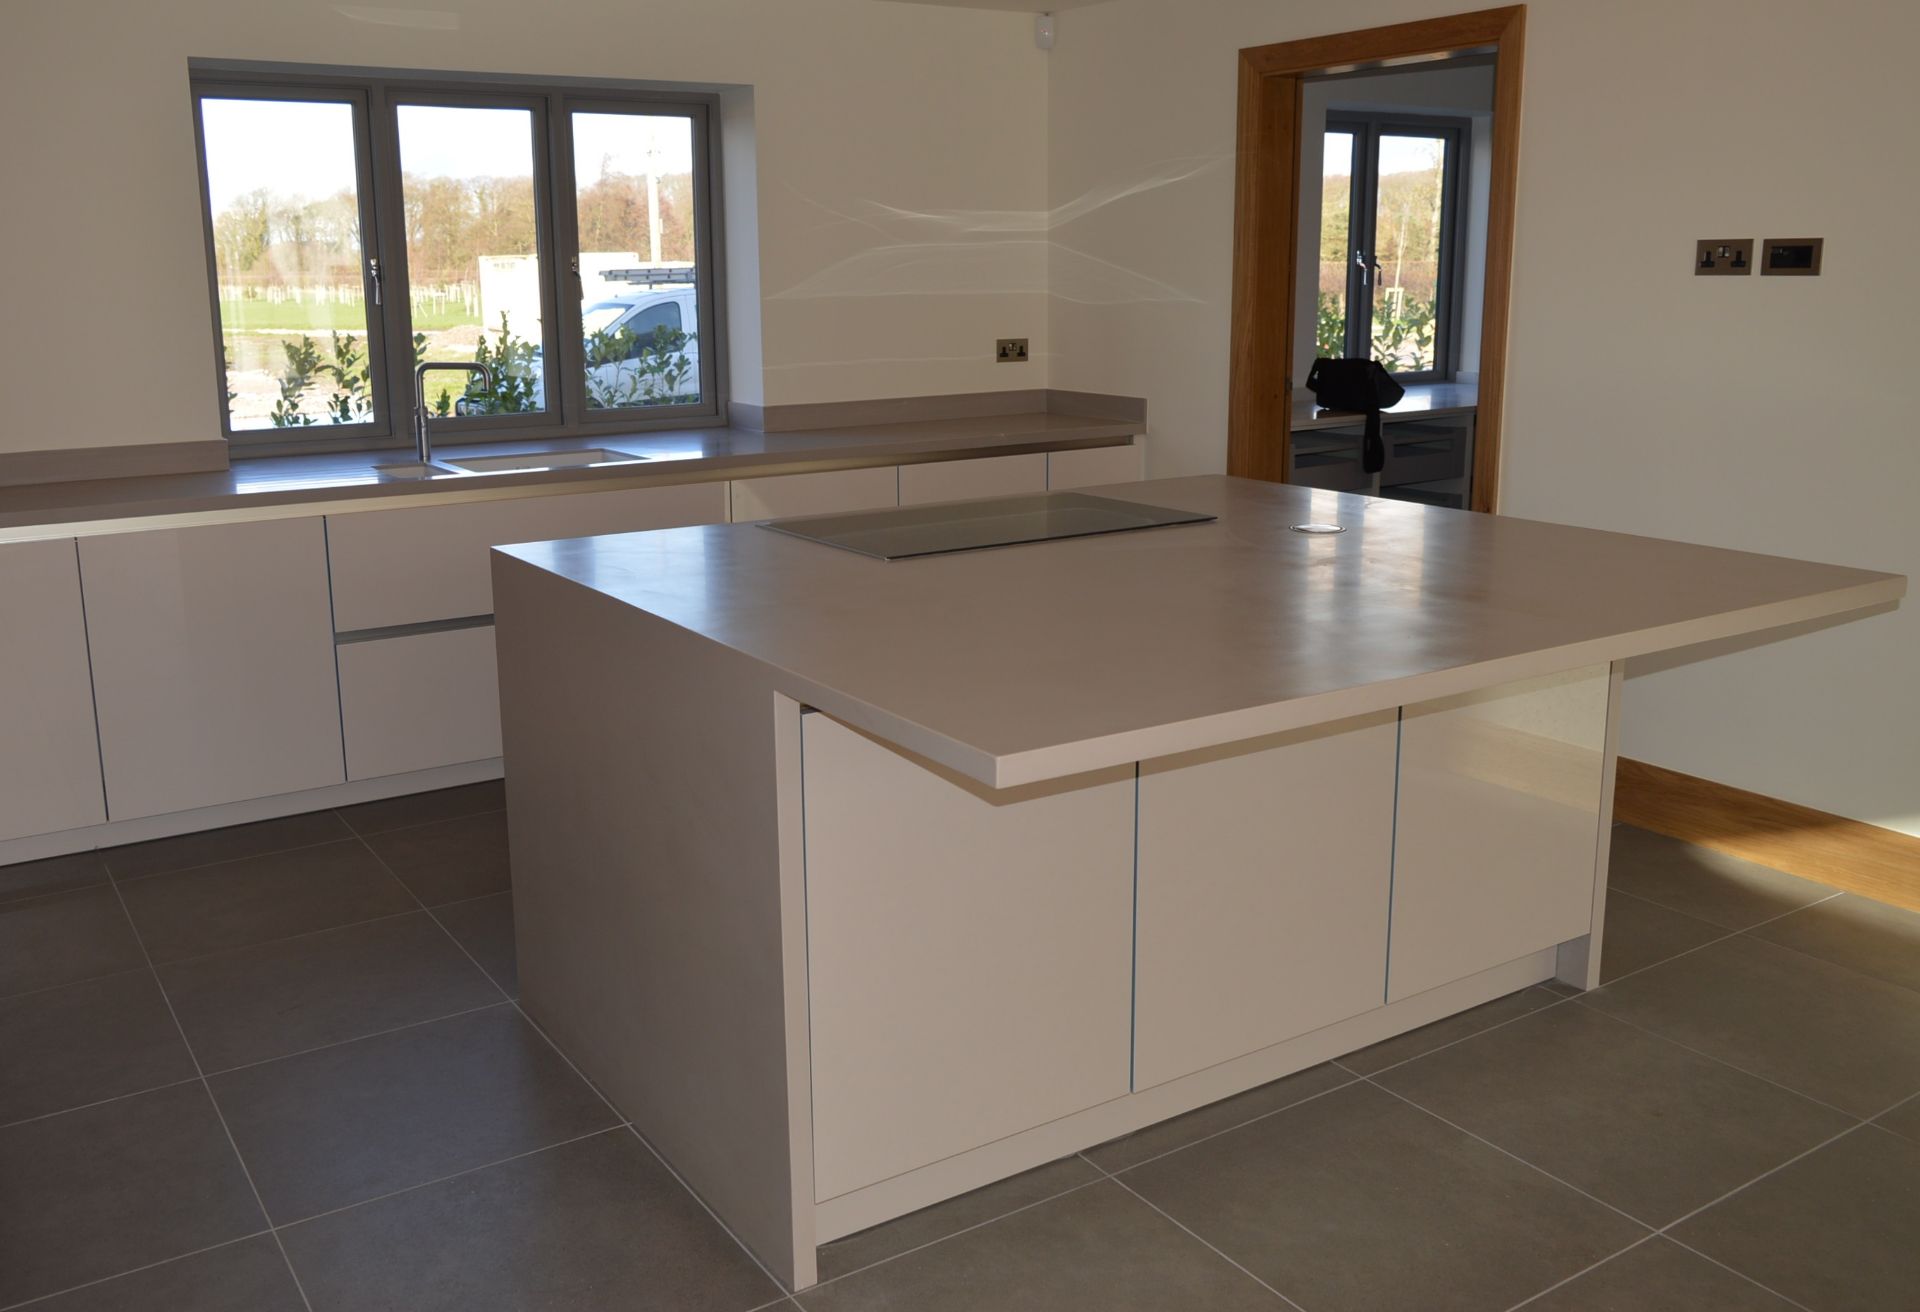 1 x Stunning KELLER Handleless FITTED KITCHEN With Corian Clay Worktops, Centre Island With - Image 93 of 104